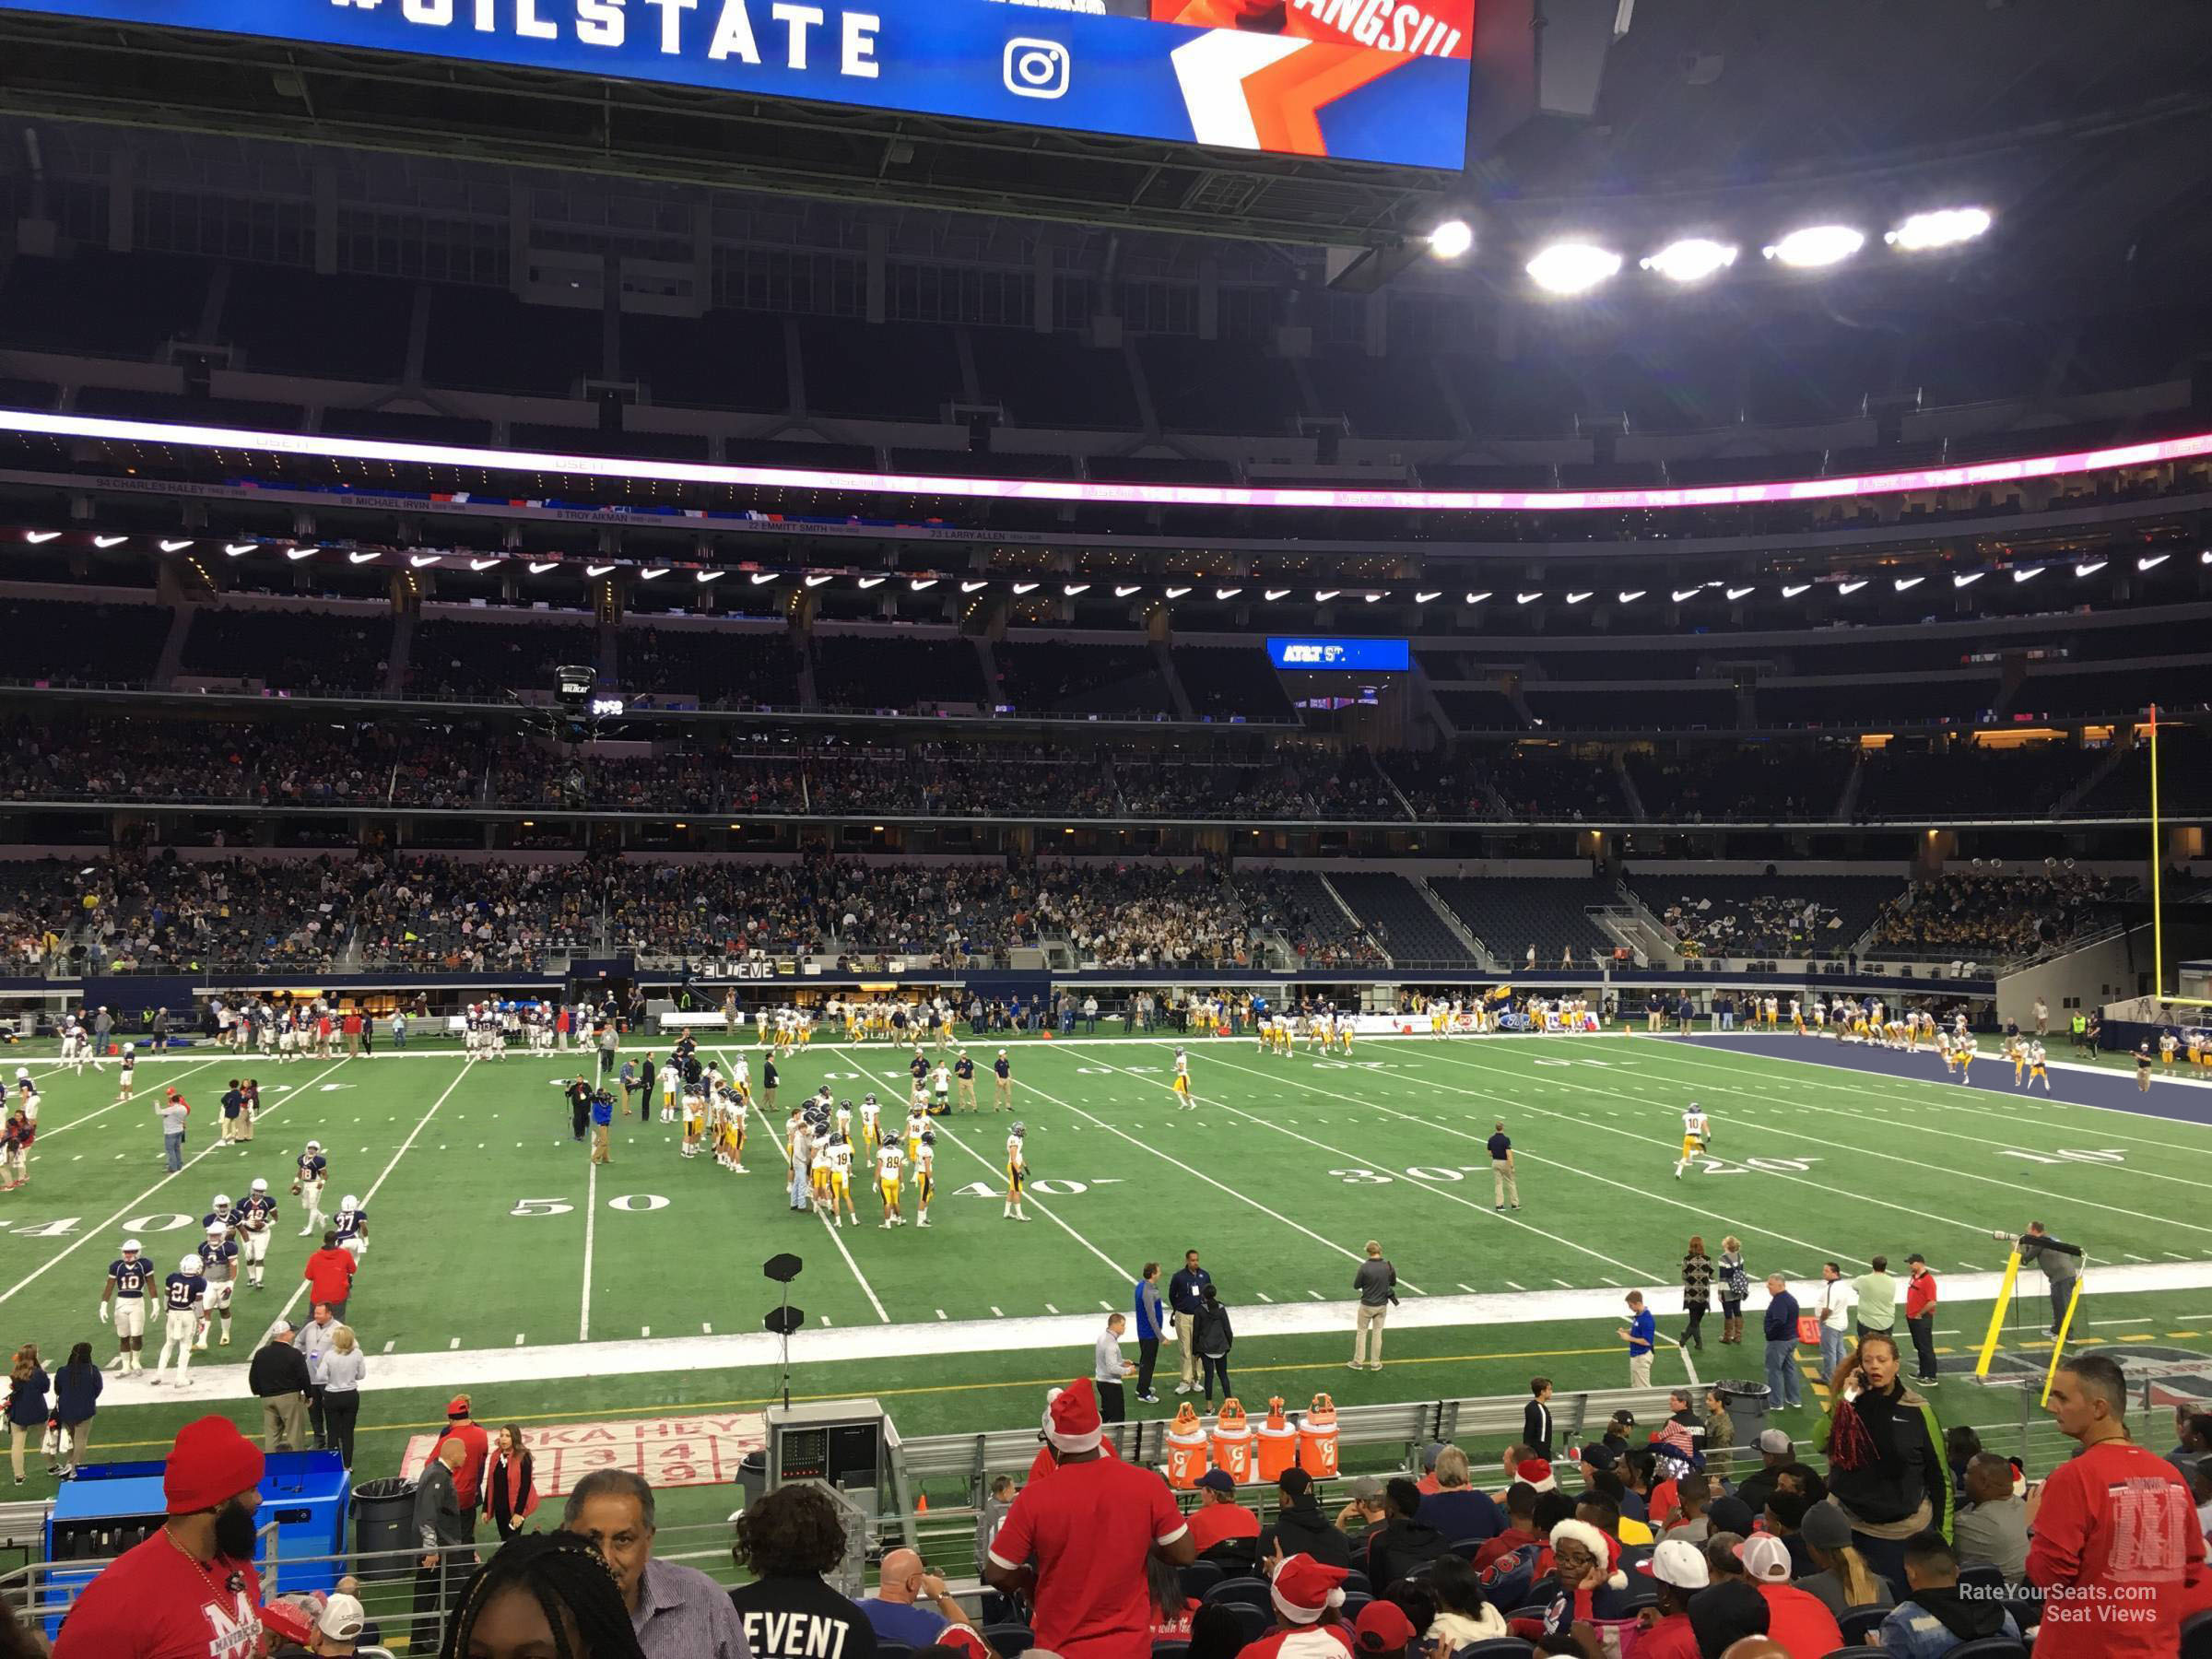 section c110, row 14 seat view  for football - at&t stadium (cowboys stadium)